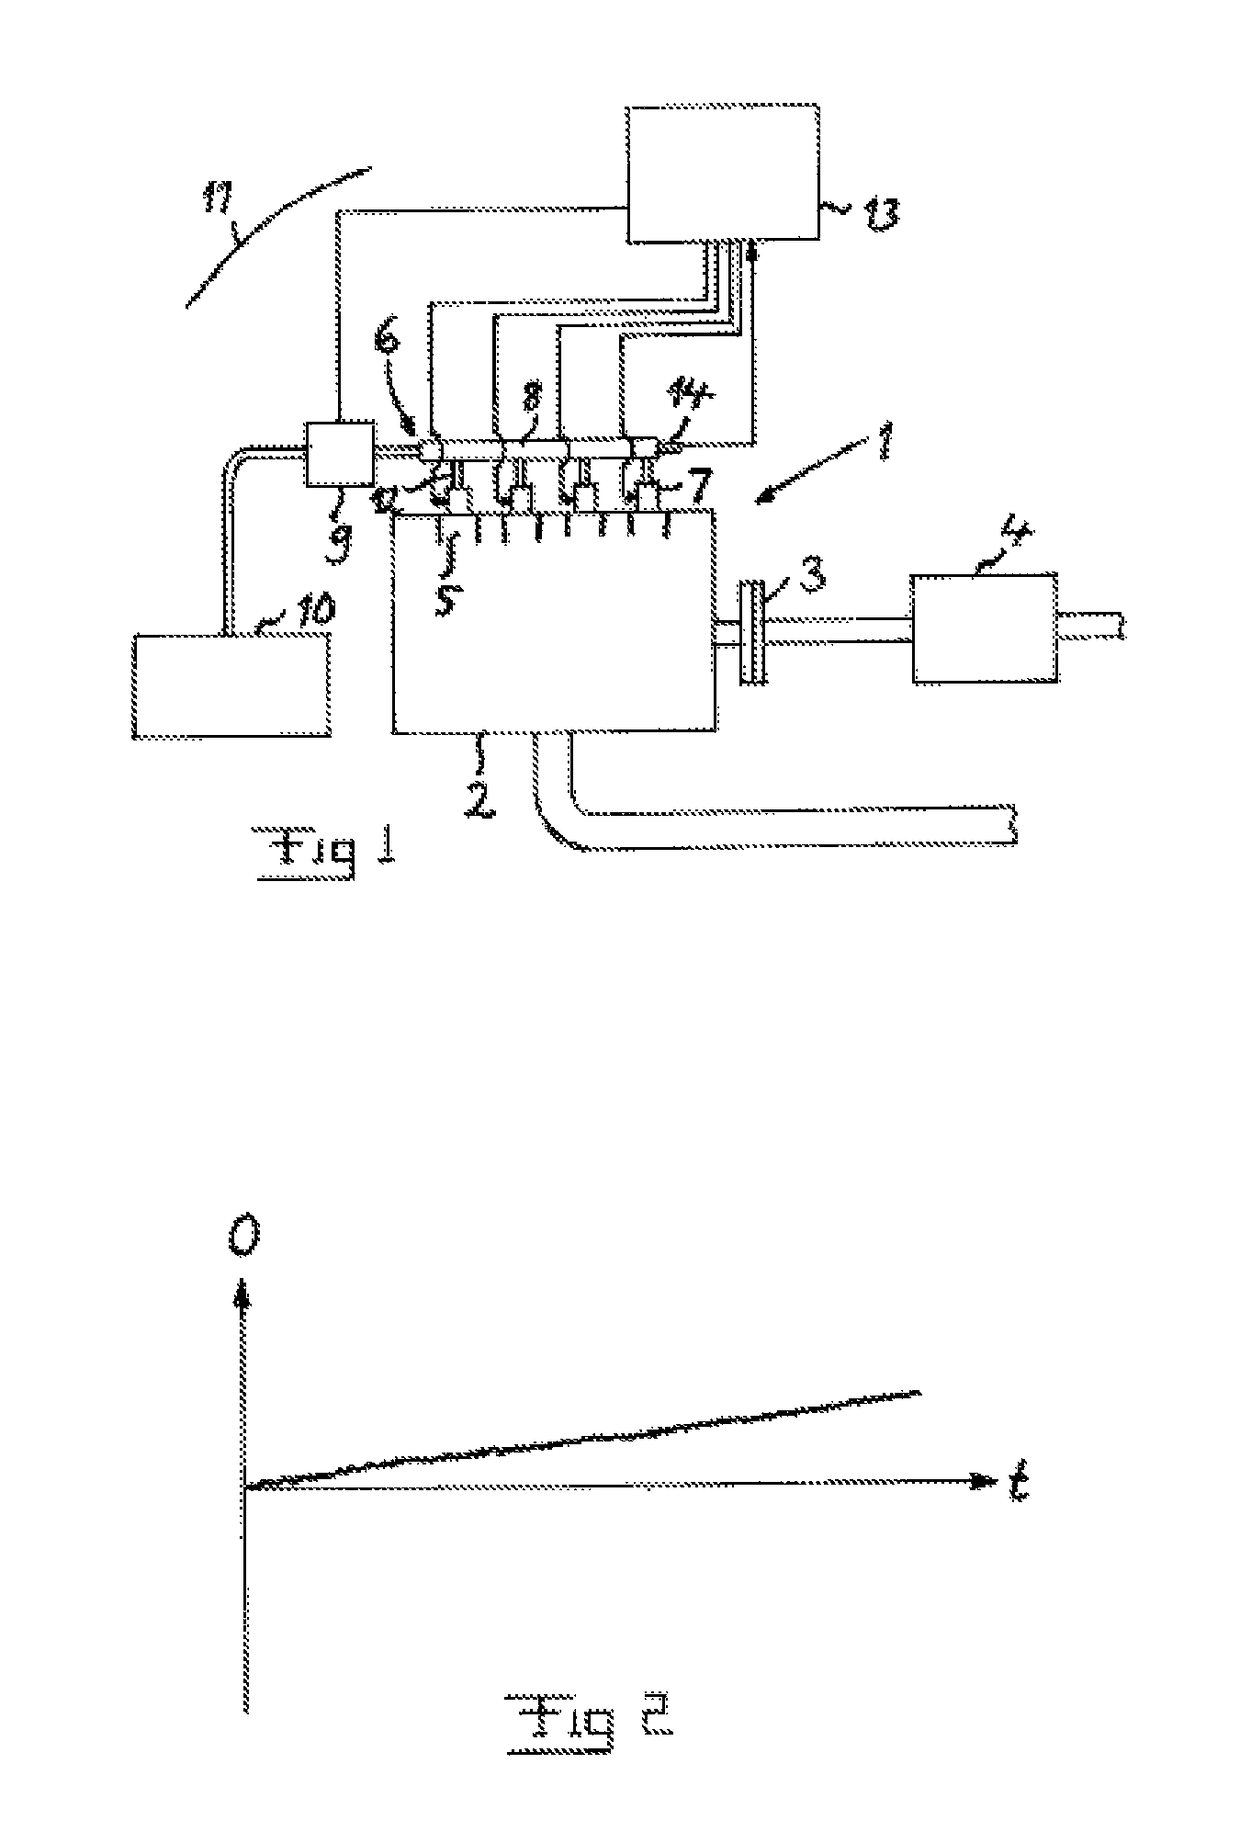 Method of determining fuel injector opening degree